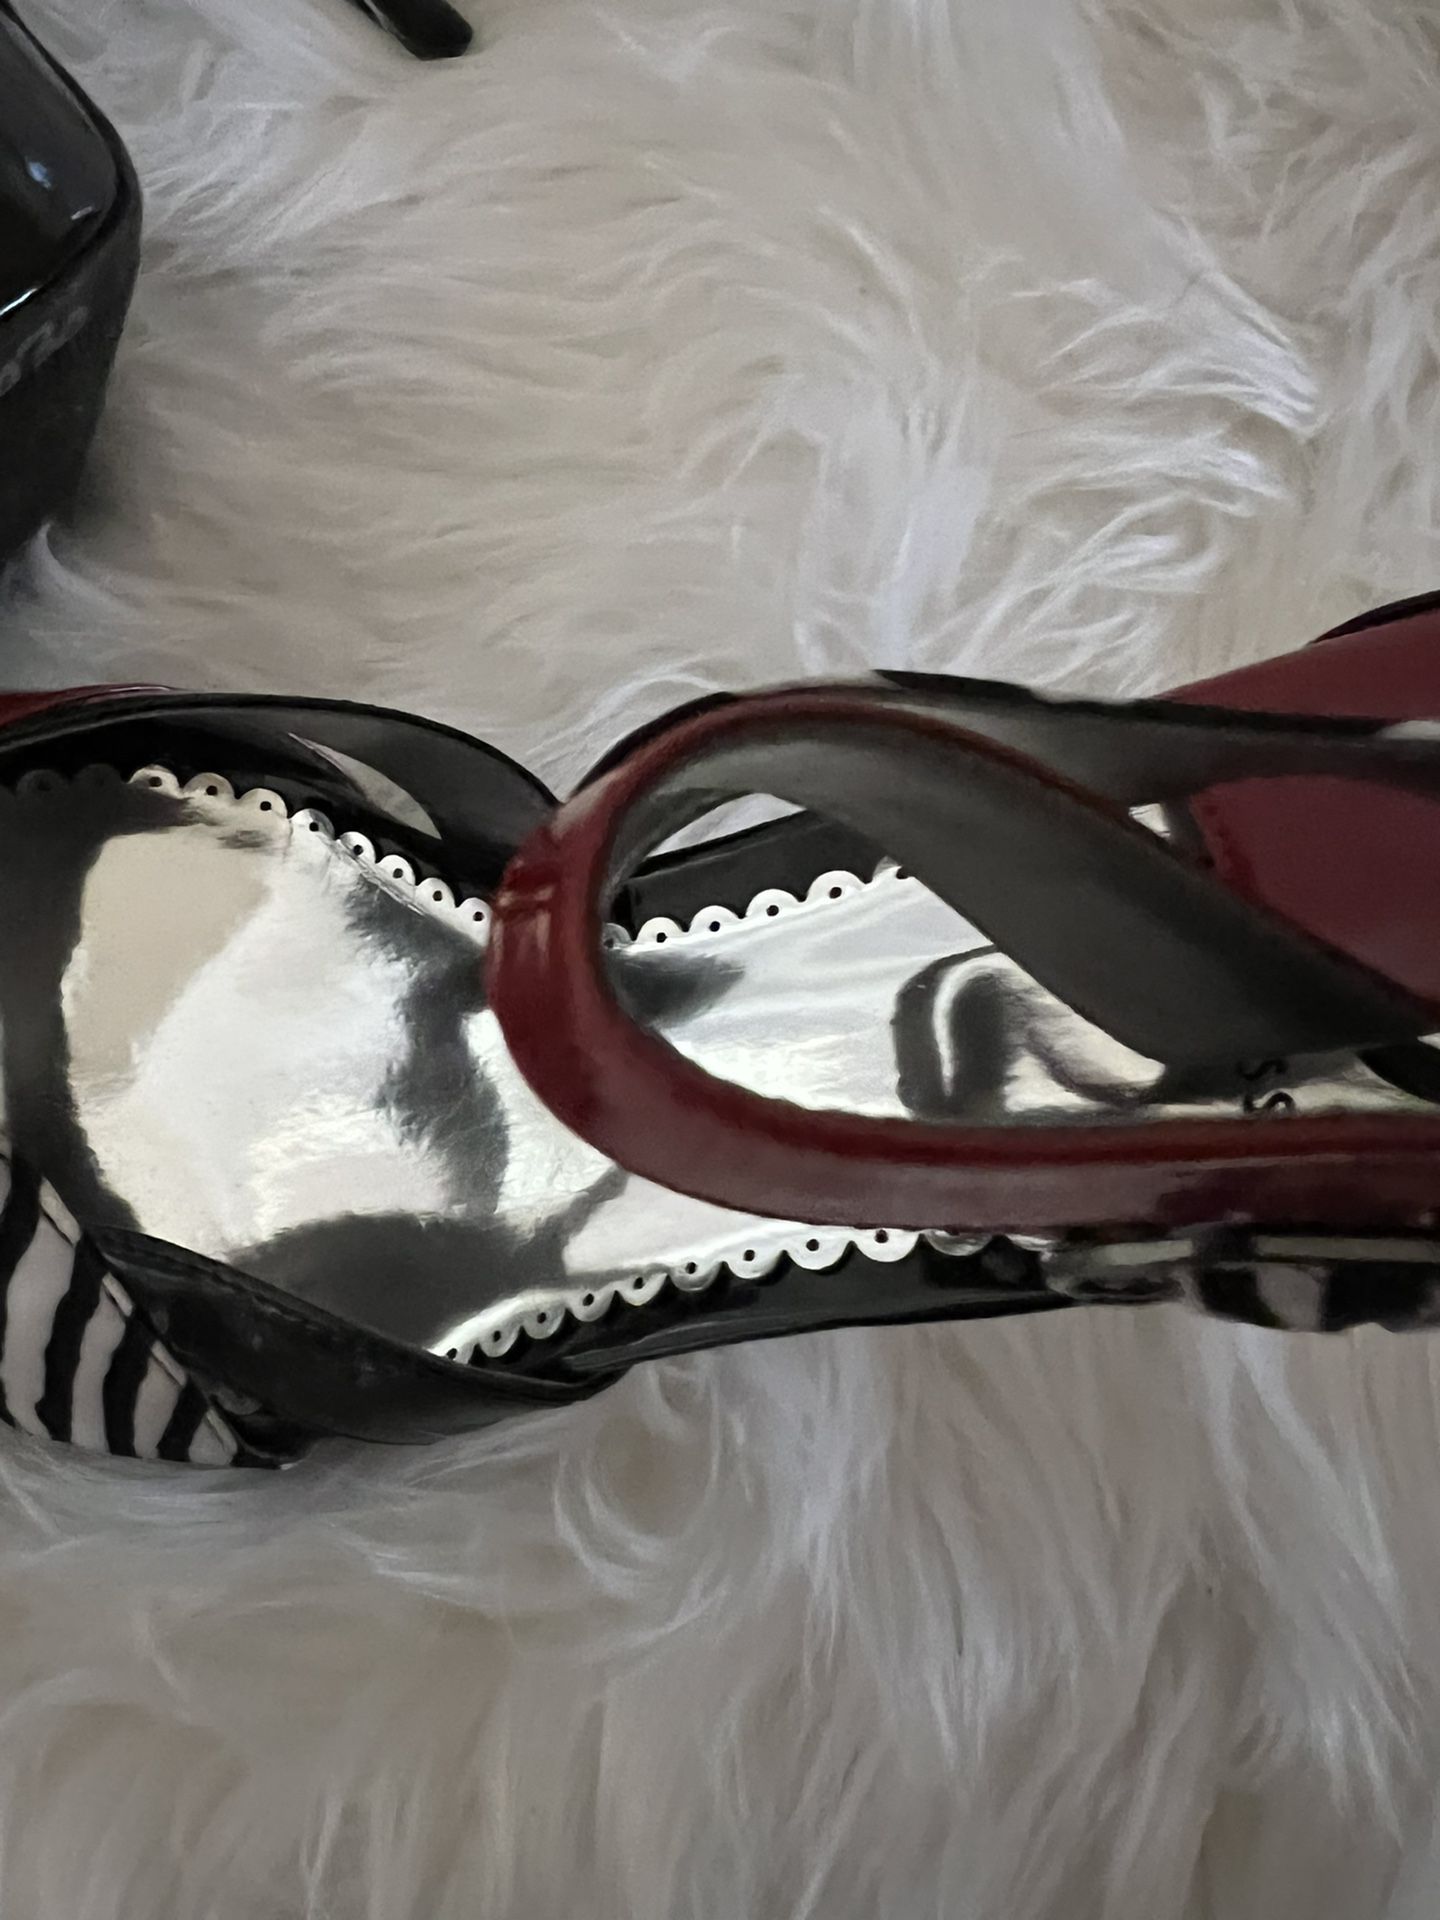 Guess Brand New Shoes  Size 10